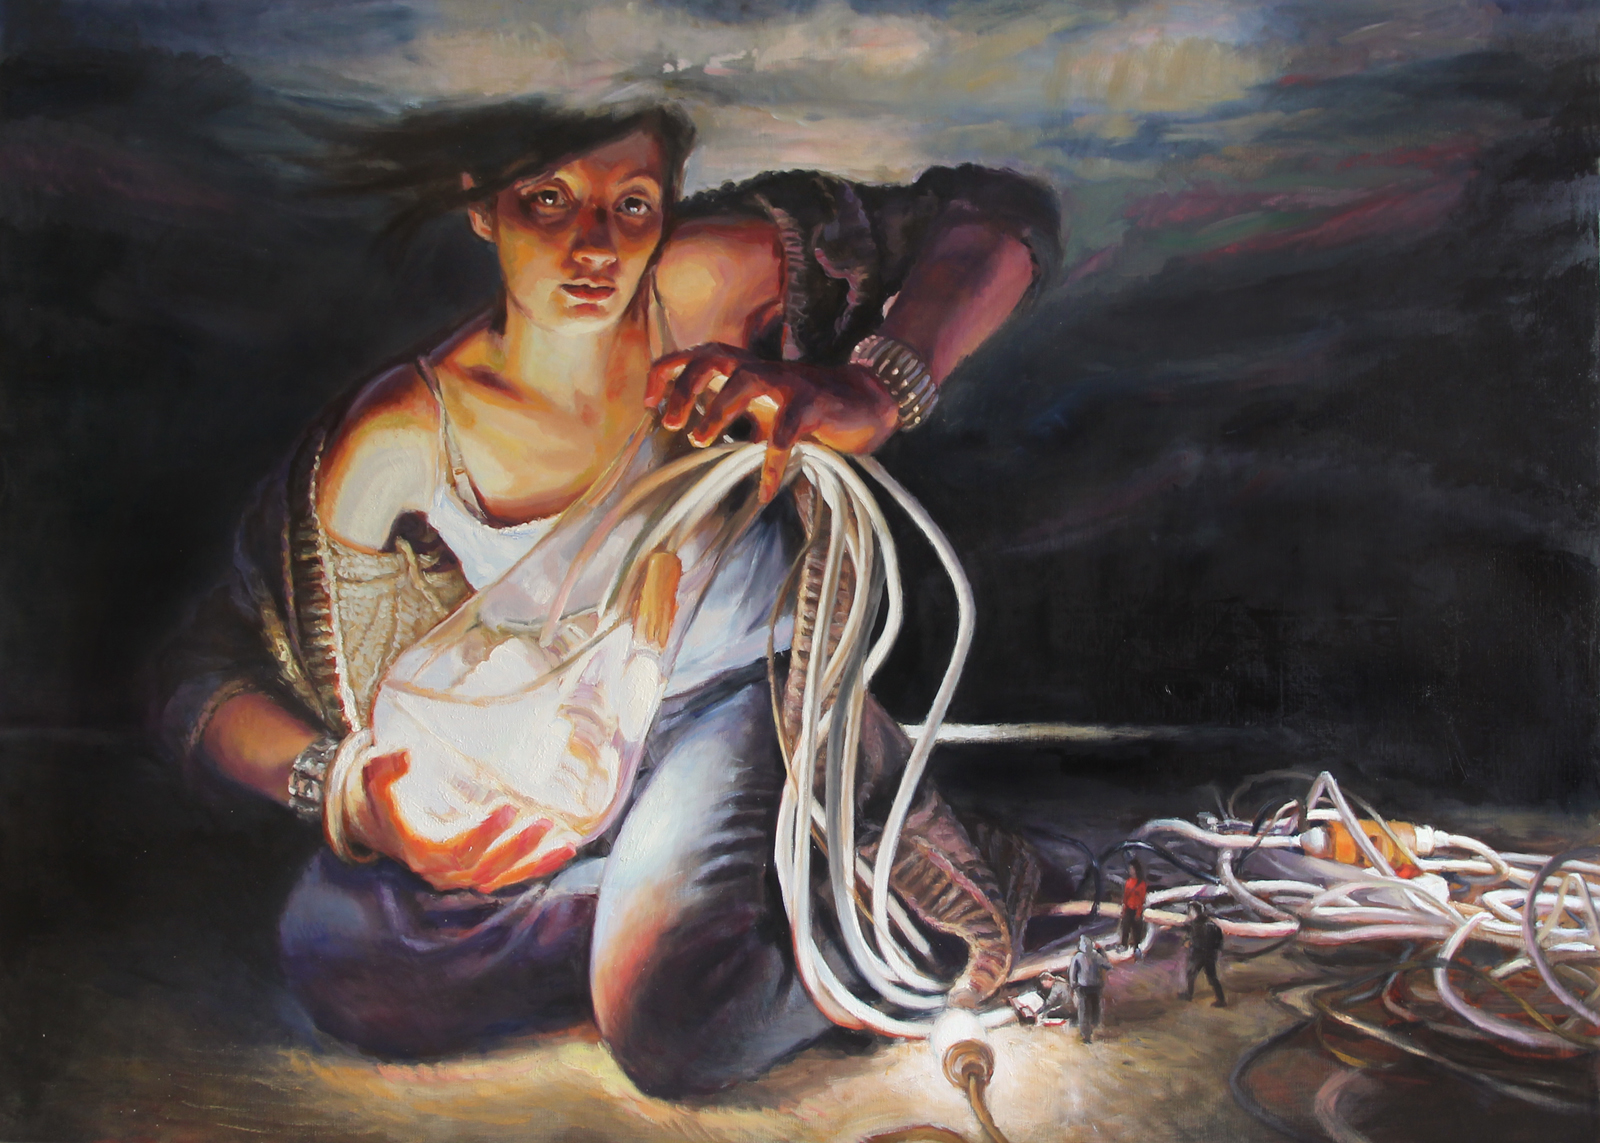 'Expecting a miracle' 150x210cm, oil on linen